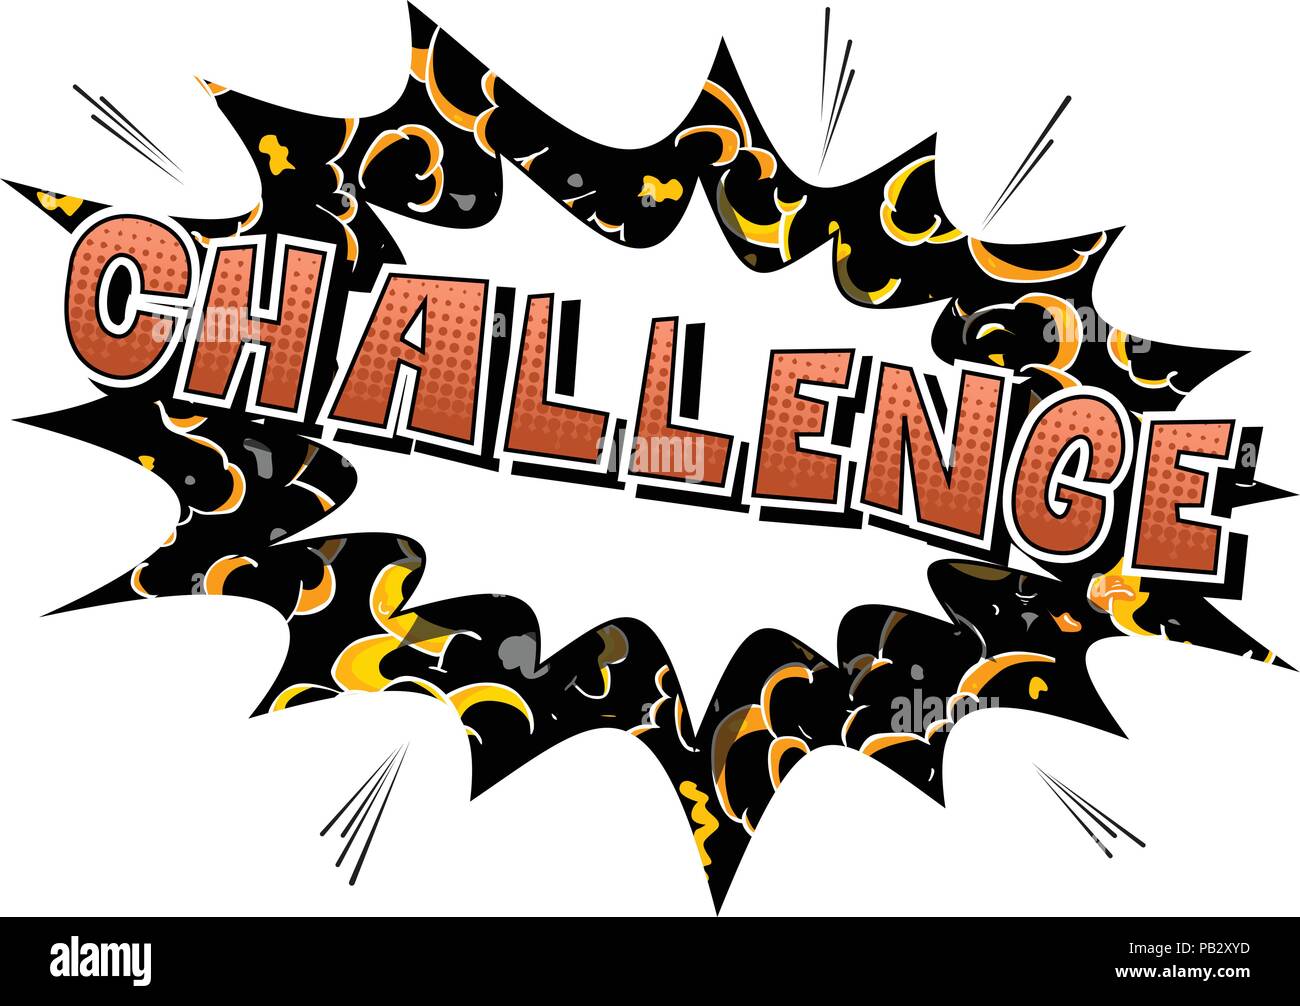 Challenge - Comic book style word on abstract background Stock Vector ...